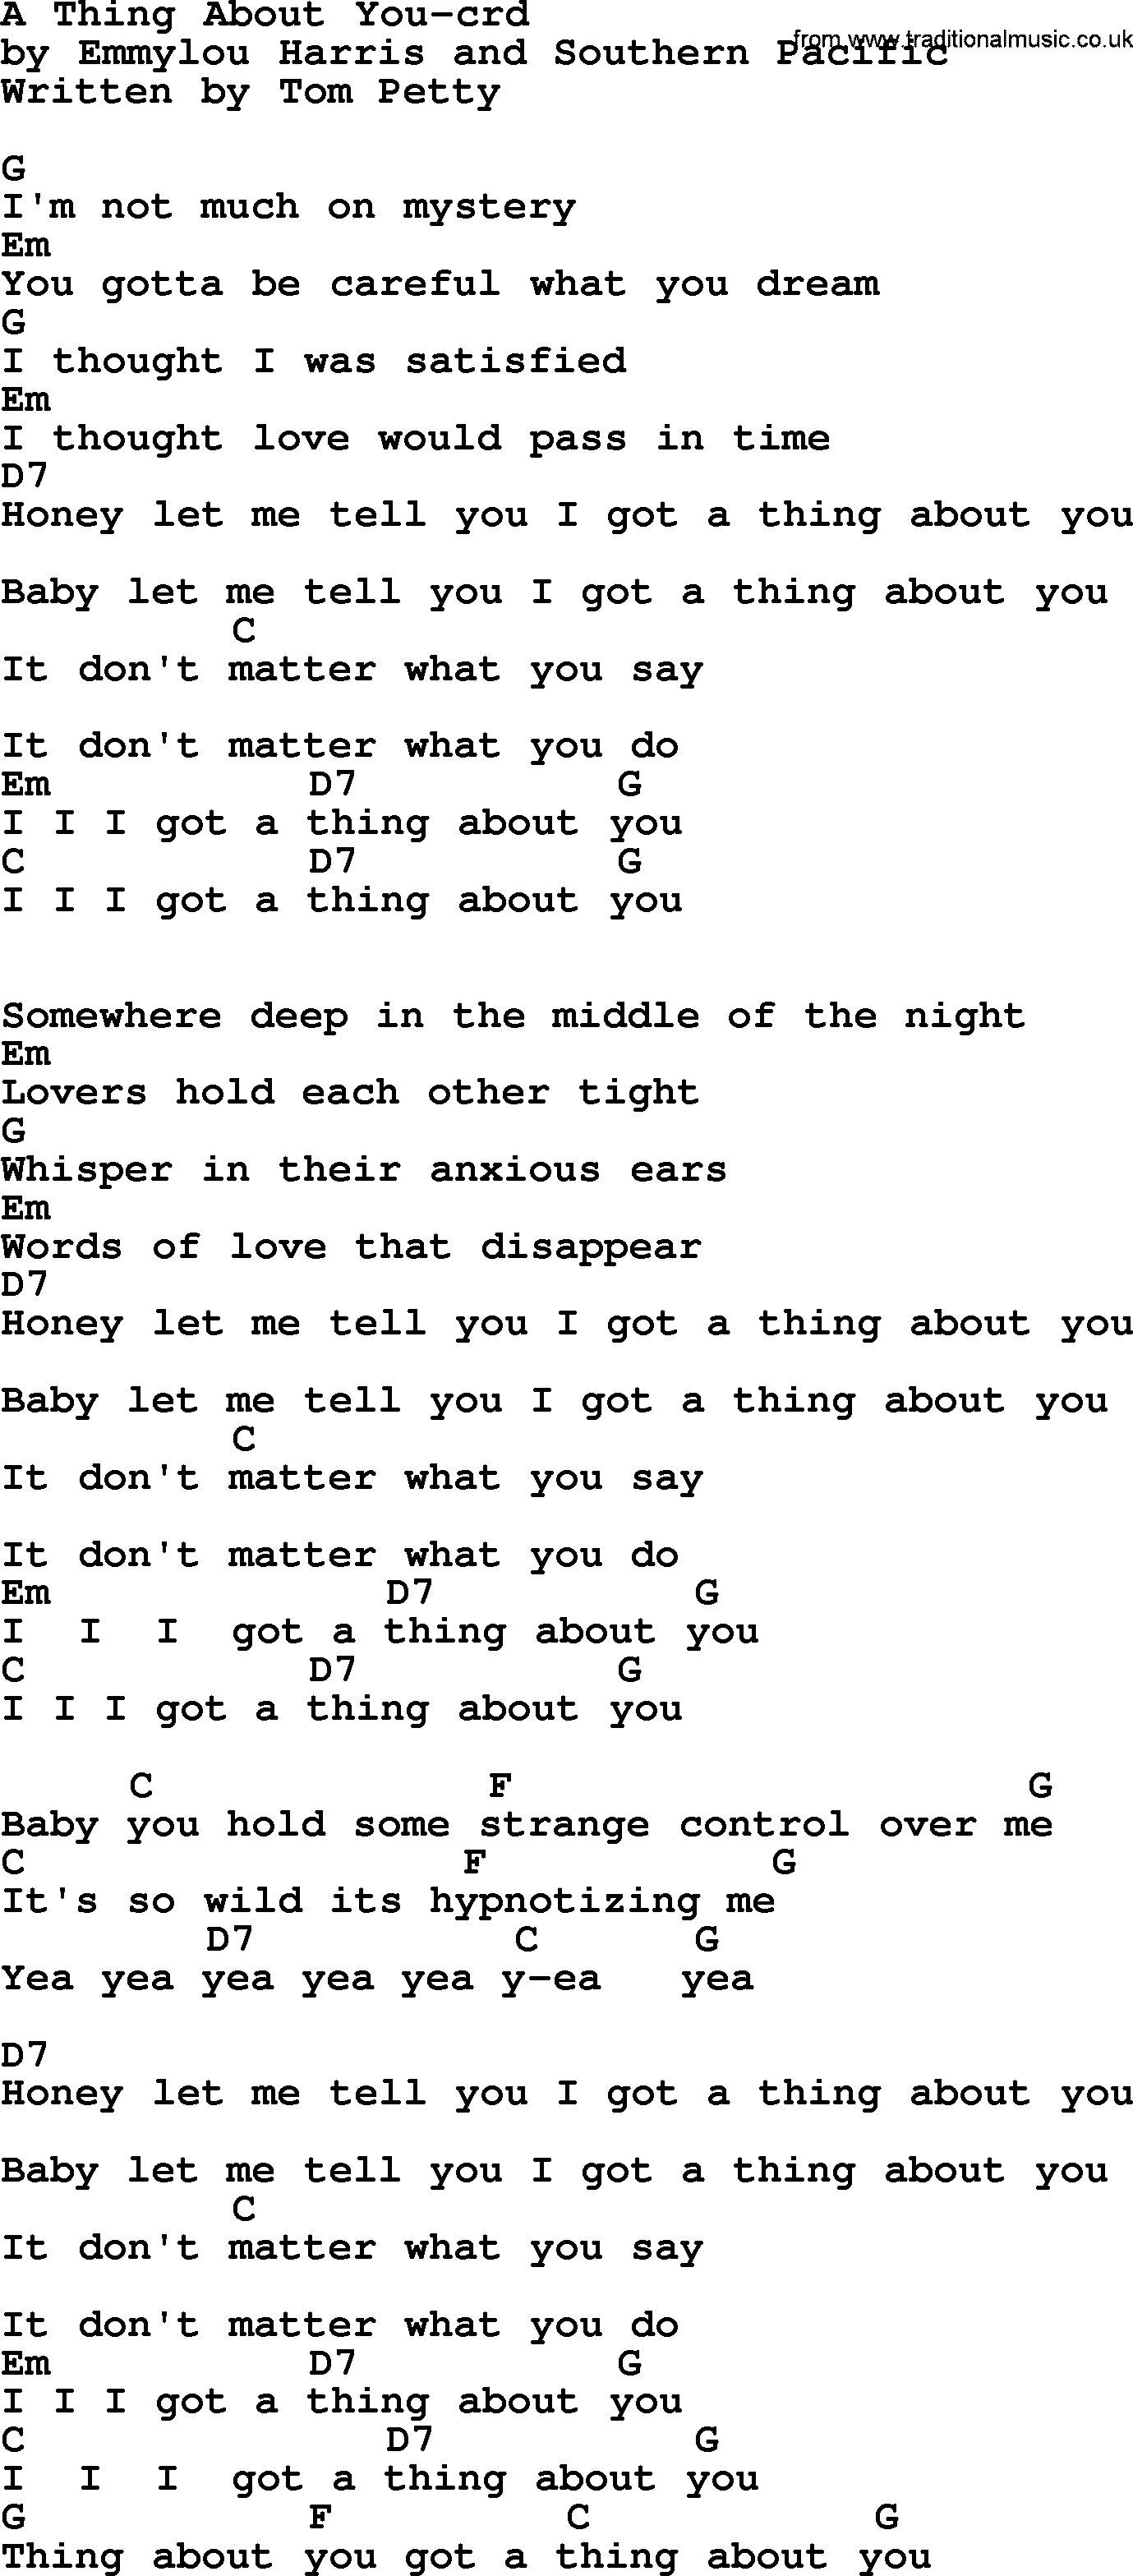 Emmylou Harris song: A Thing About You 2 lyrics and chords